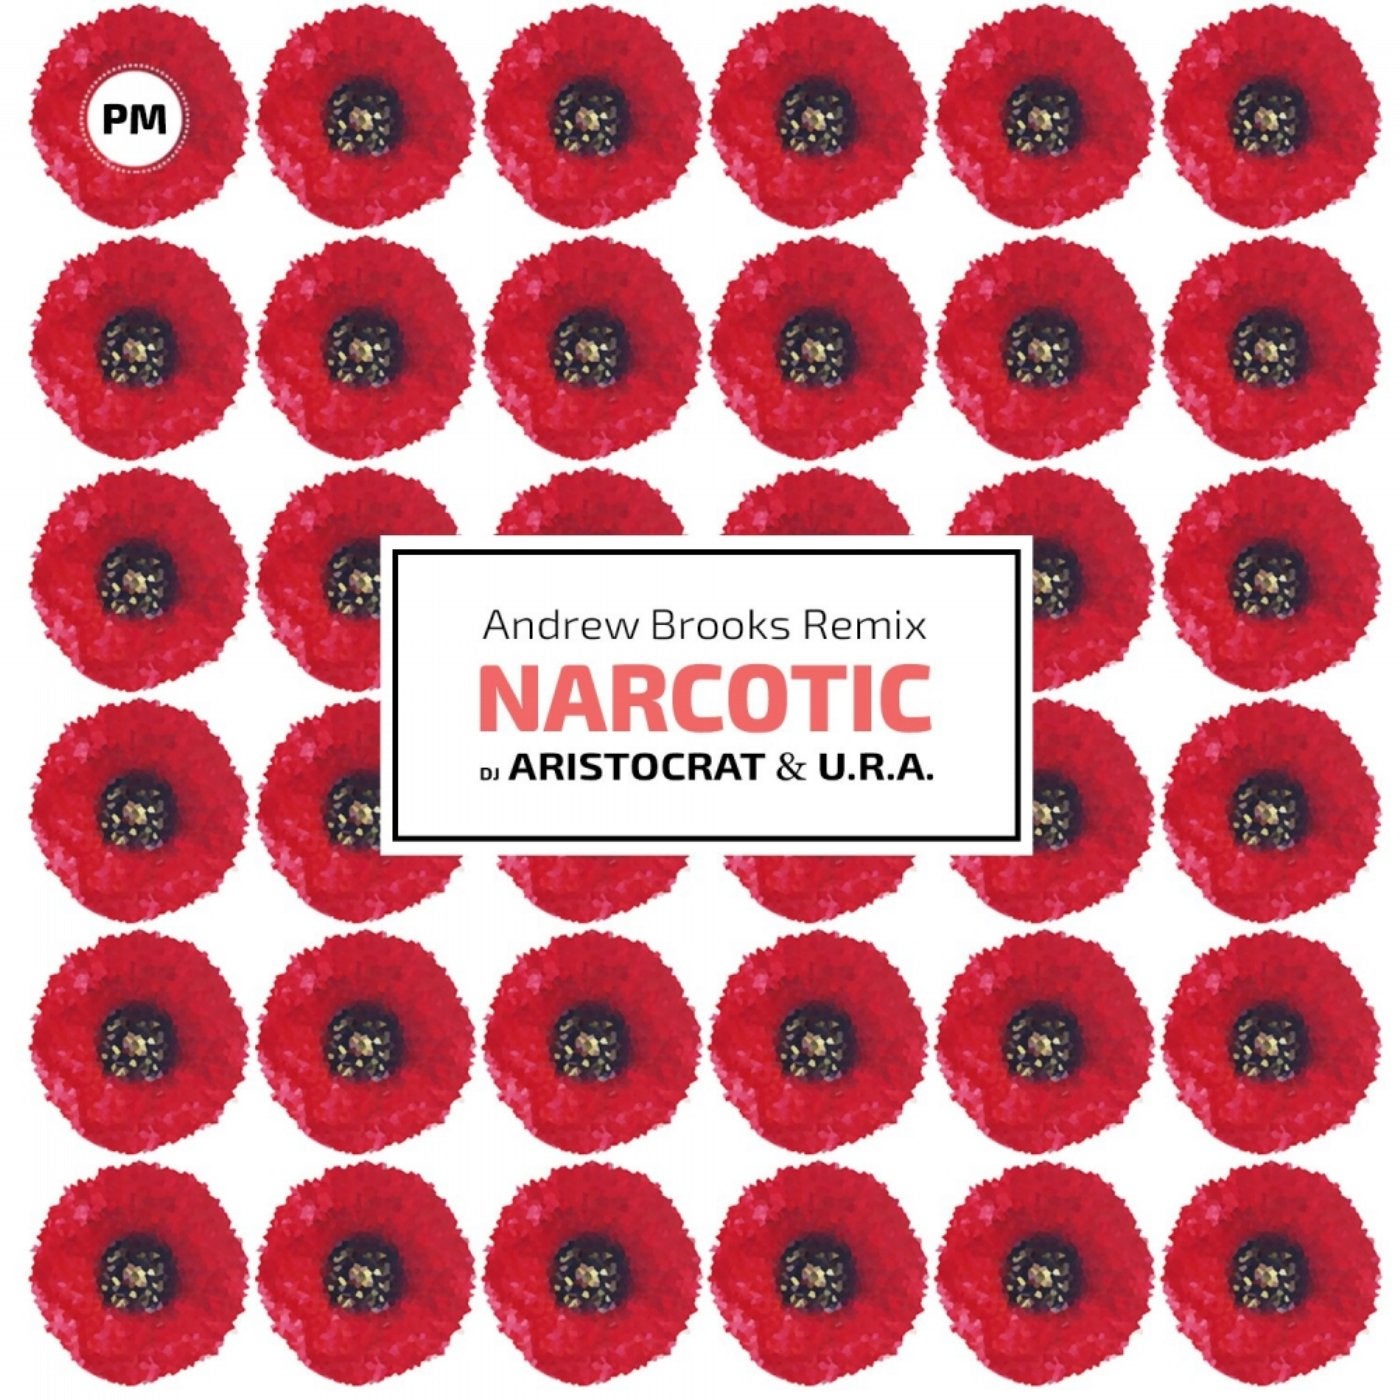 Narcotic (Andrew Brooks Remix)